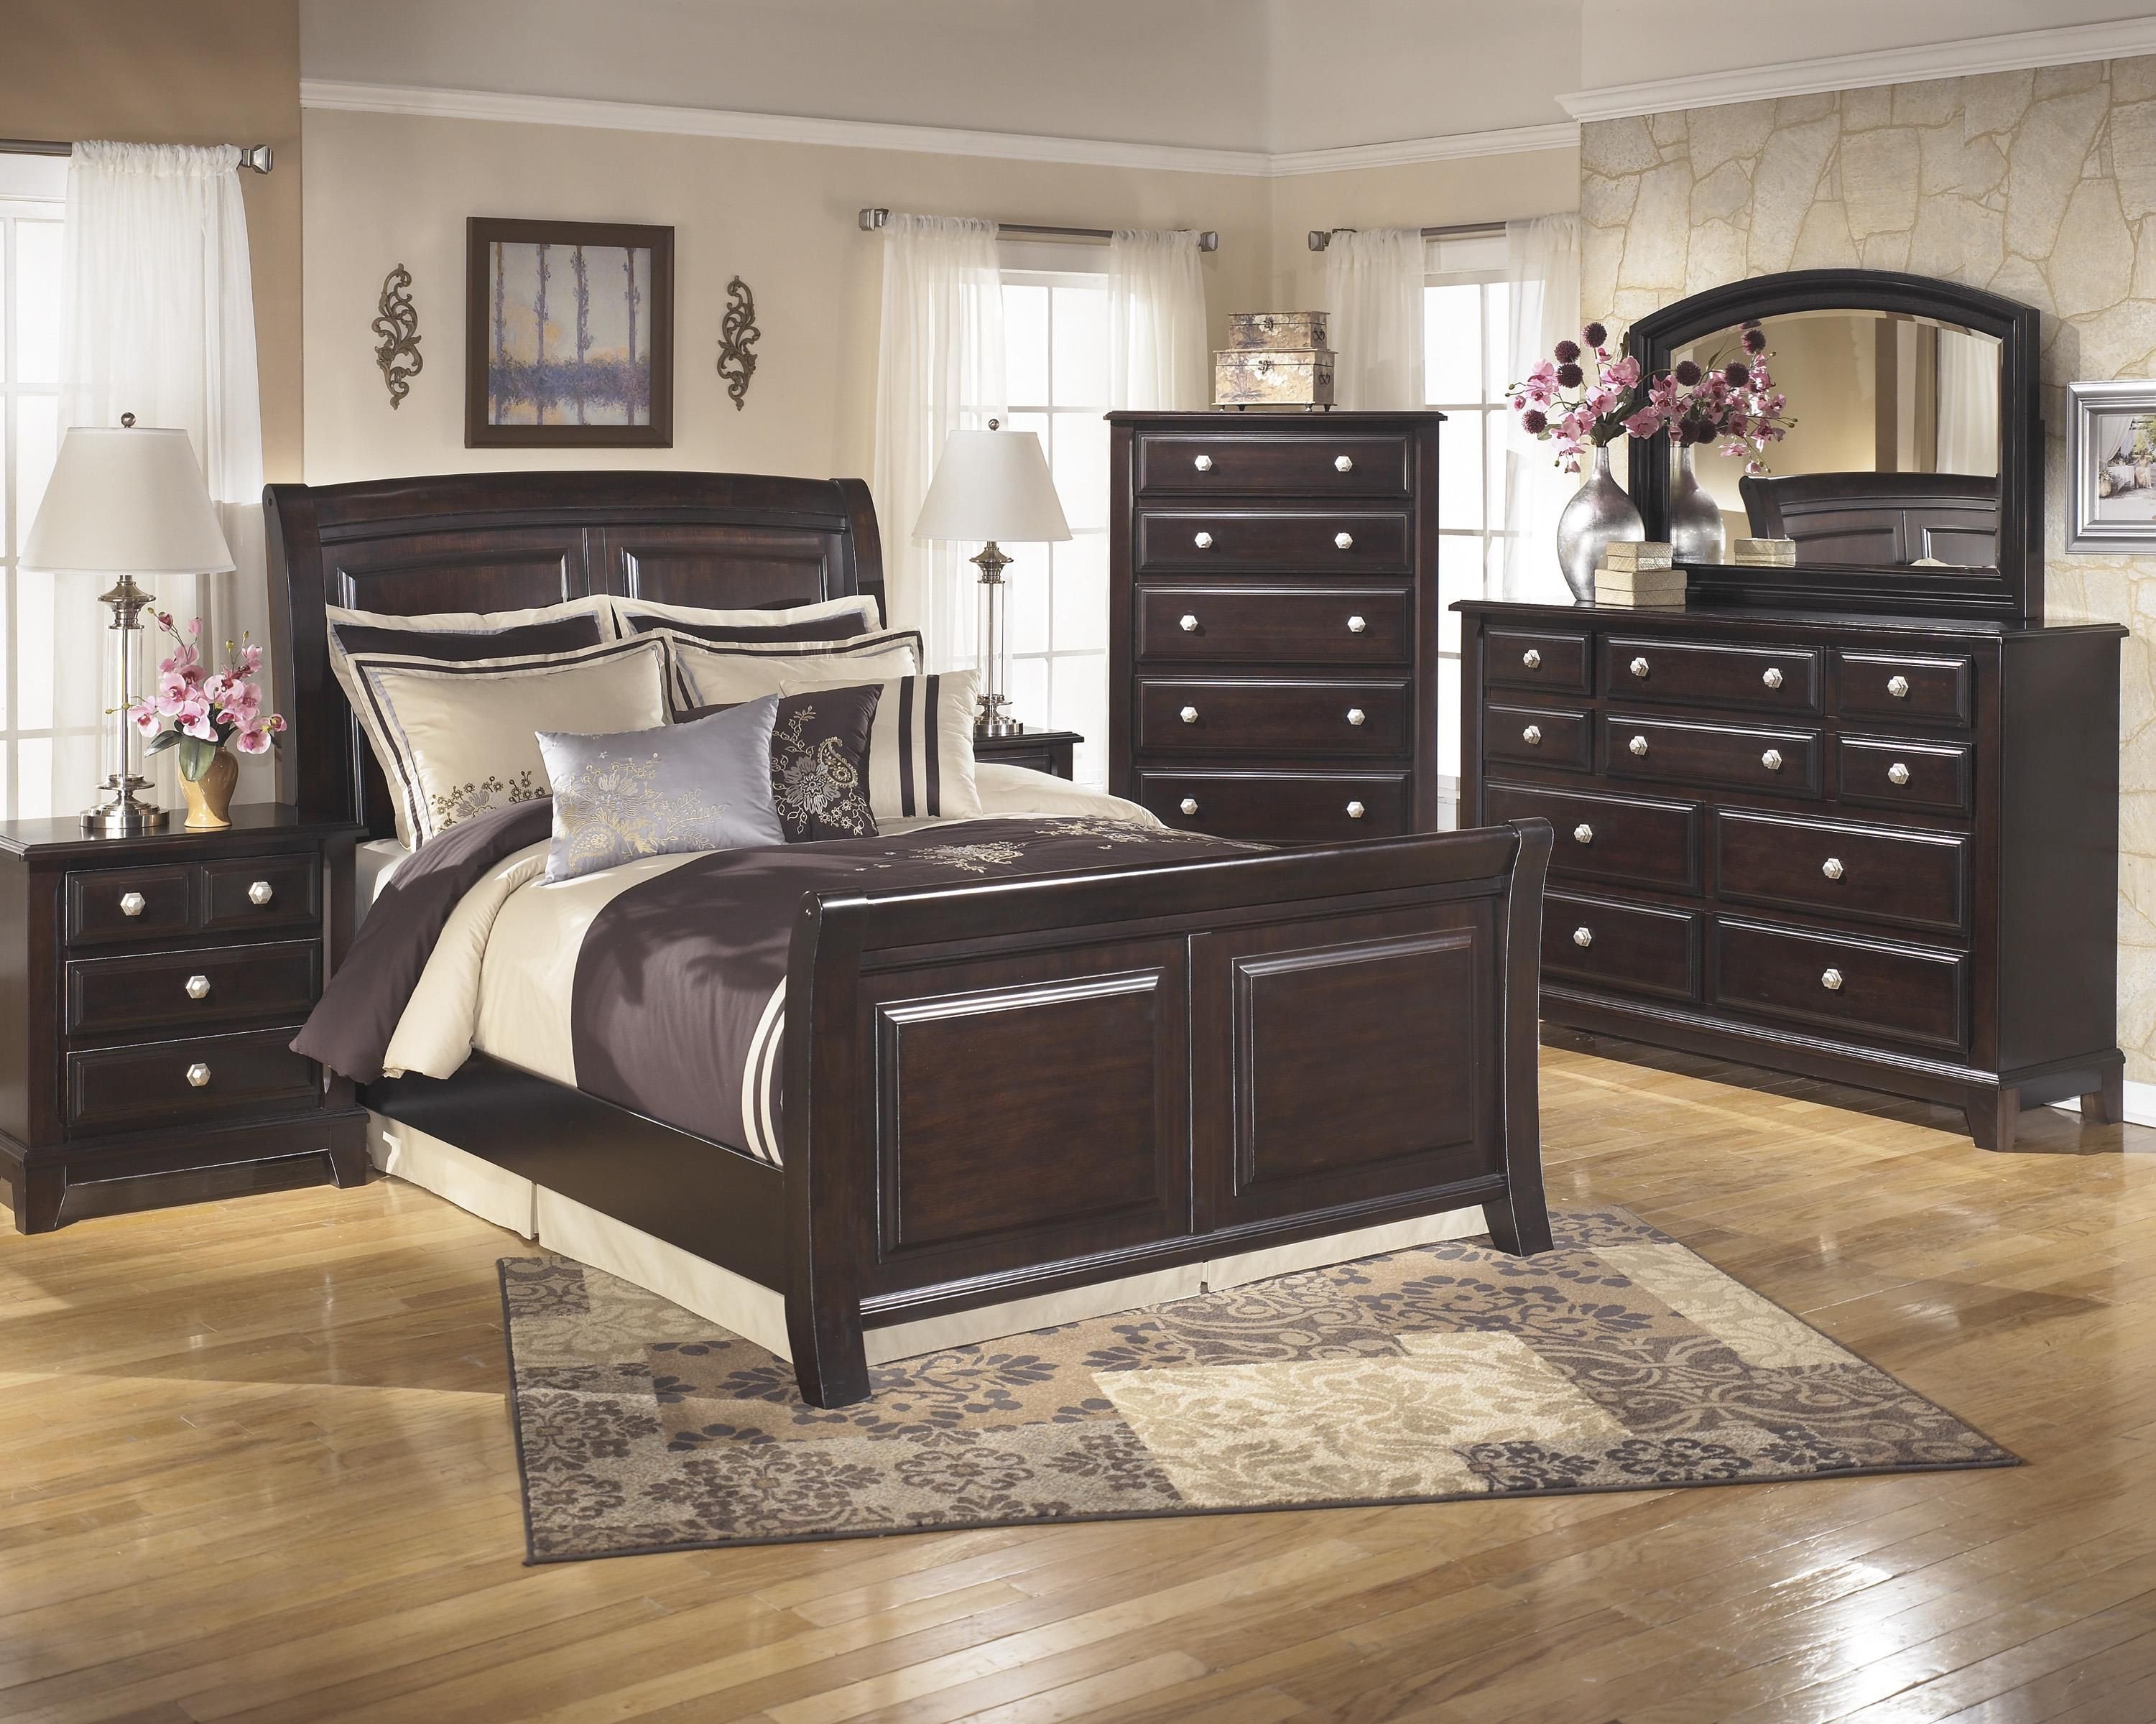 Signature Design by ashley Bedroom Set Inspirational Ridgley King Bedroom Group by Signature Design by ashley